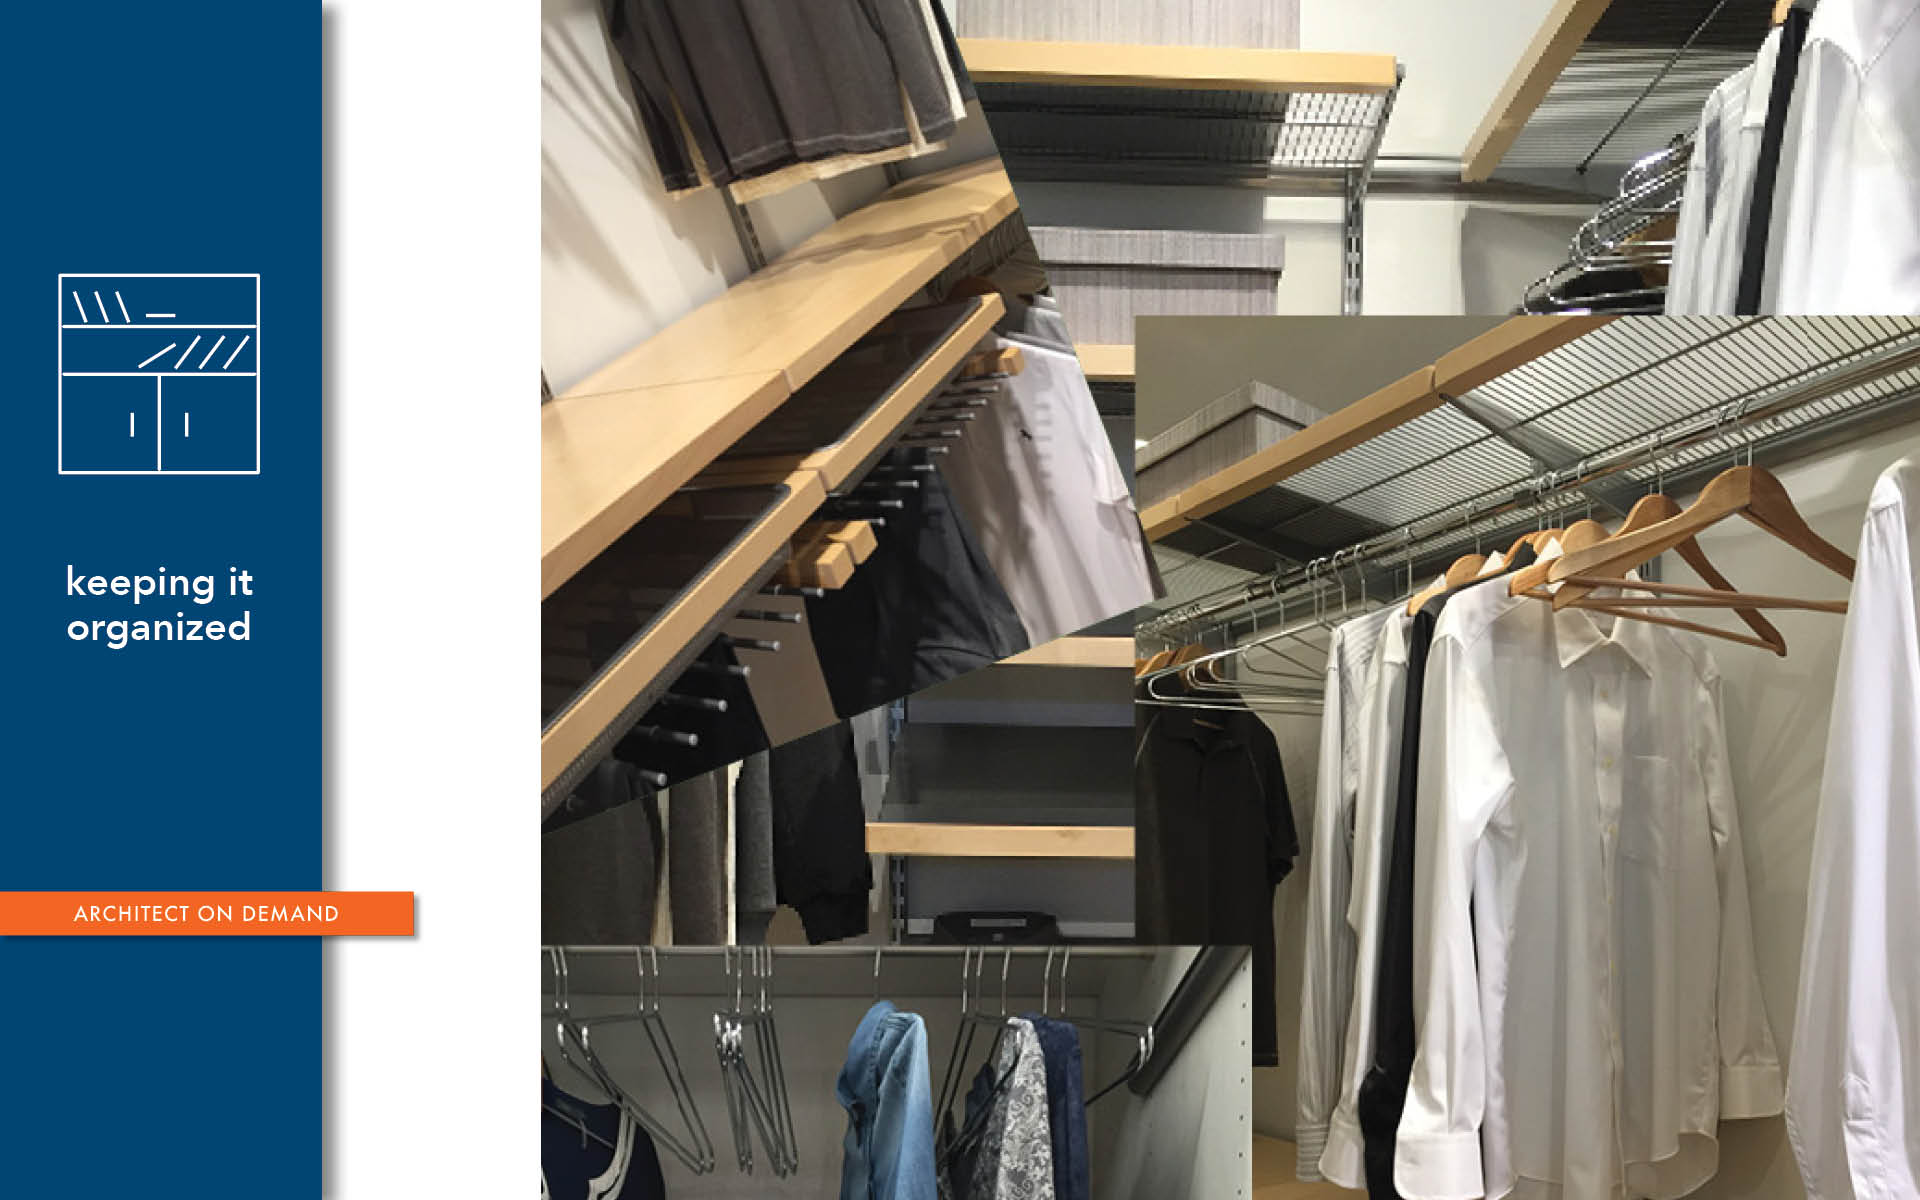 reach-in closet, architect on demand, advice without strings